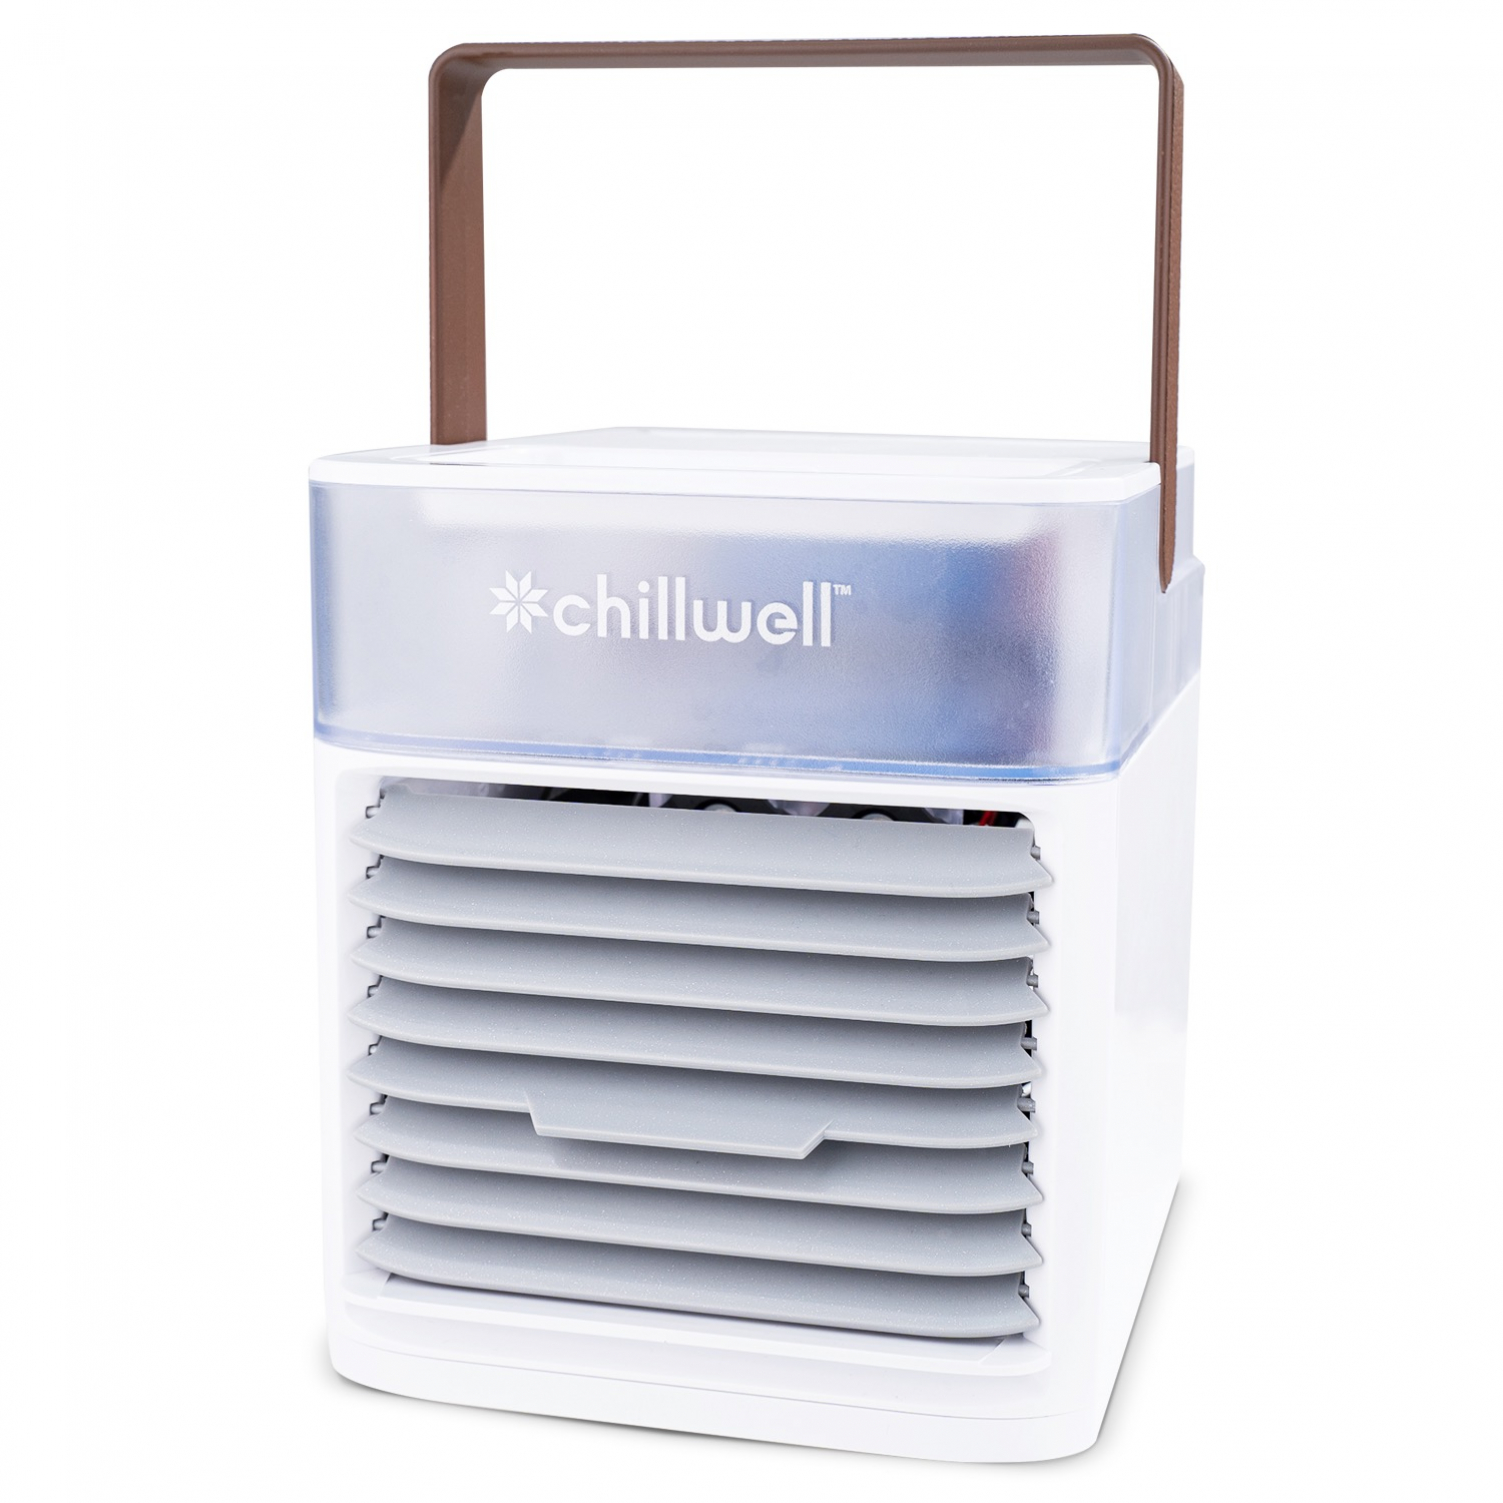 Chillwell Ac Portable Ac Customer Reviews